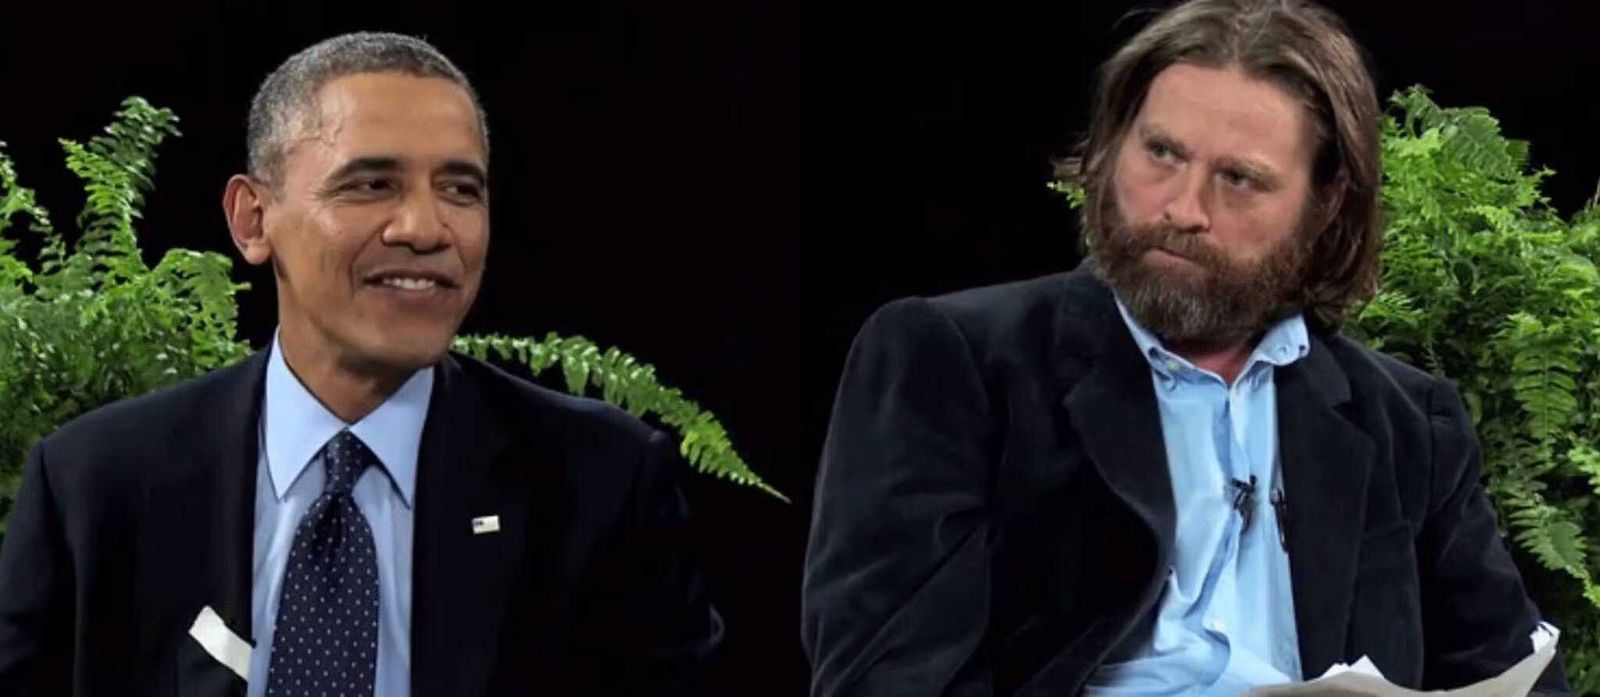 Barack Obama and Zach Galifianakis (Source: The Independent)